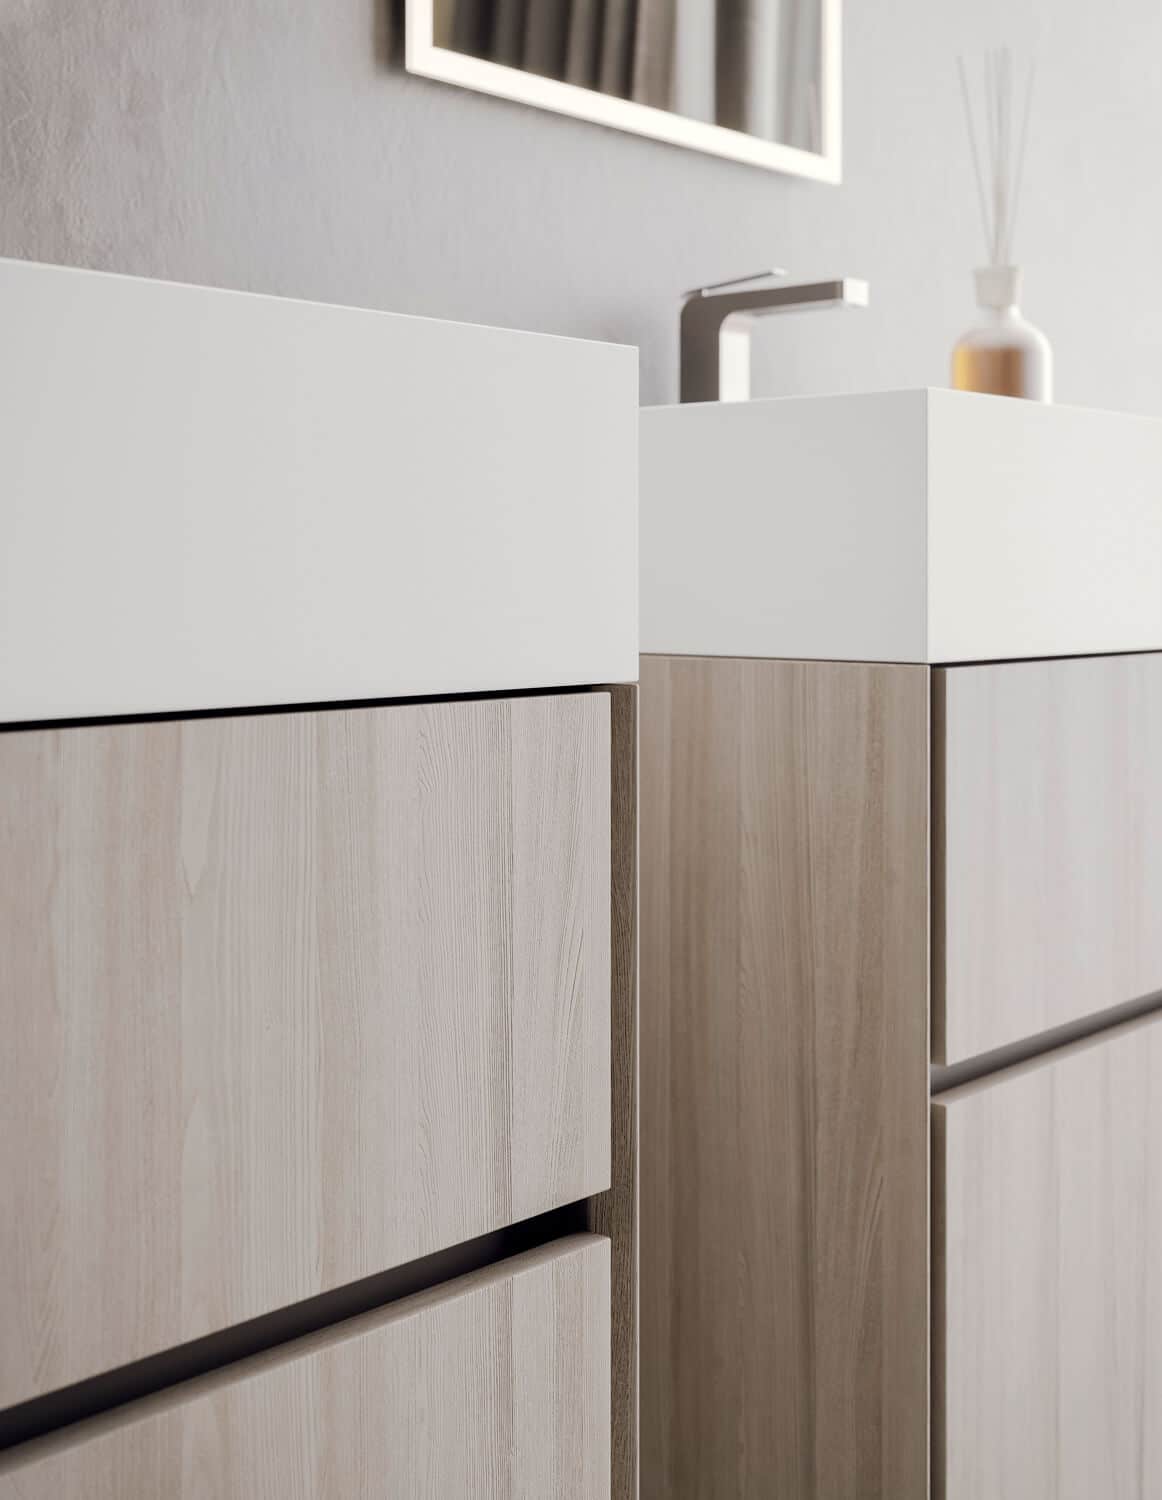 Detail of the cabinets with the Libera+ recessed frame.